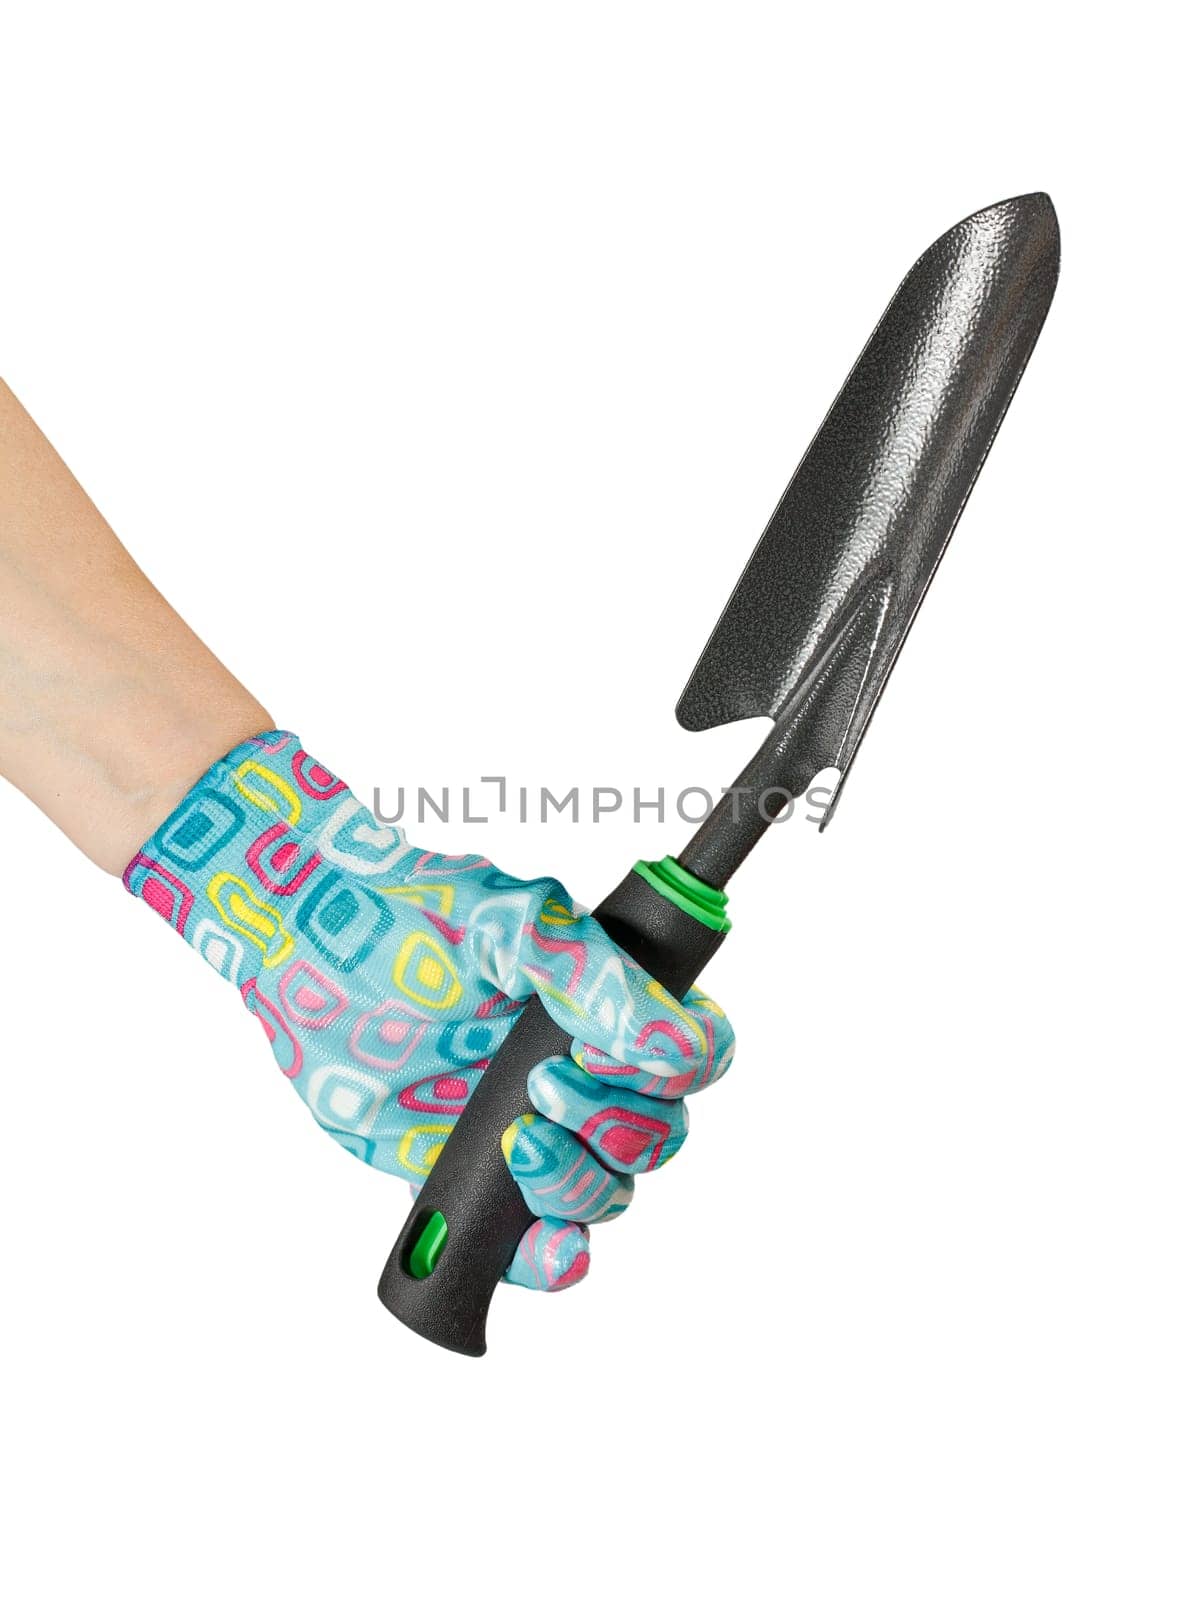 Small garden trowel in a hand dressed in a glove on the white isolated background by mvg6894